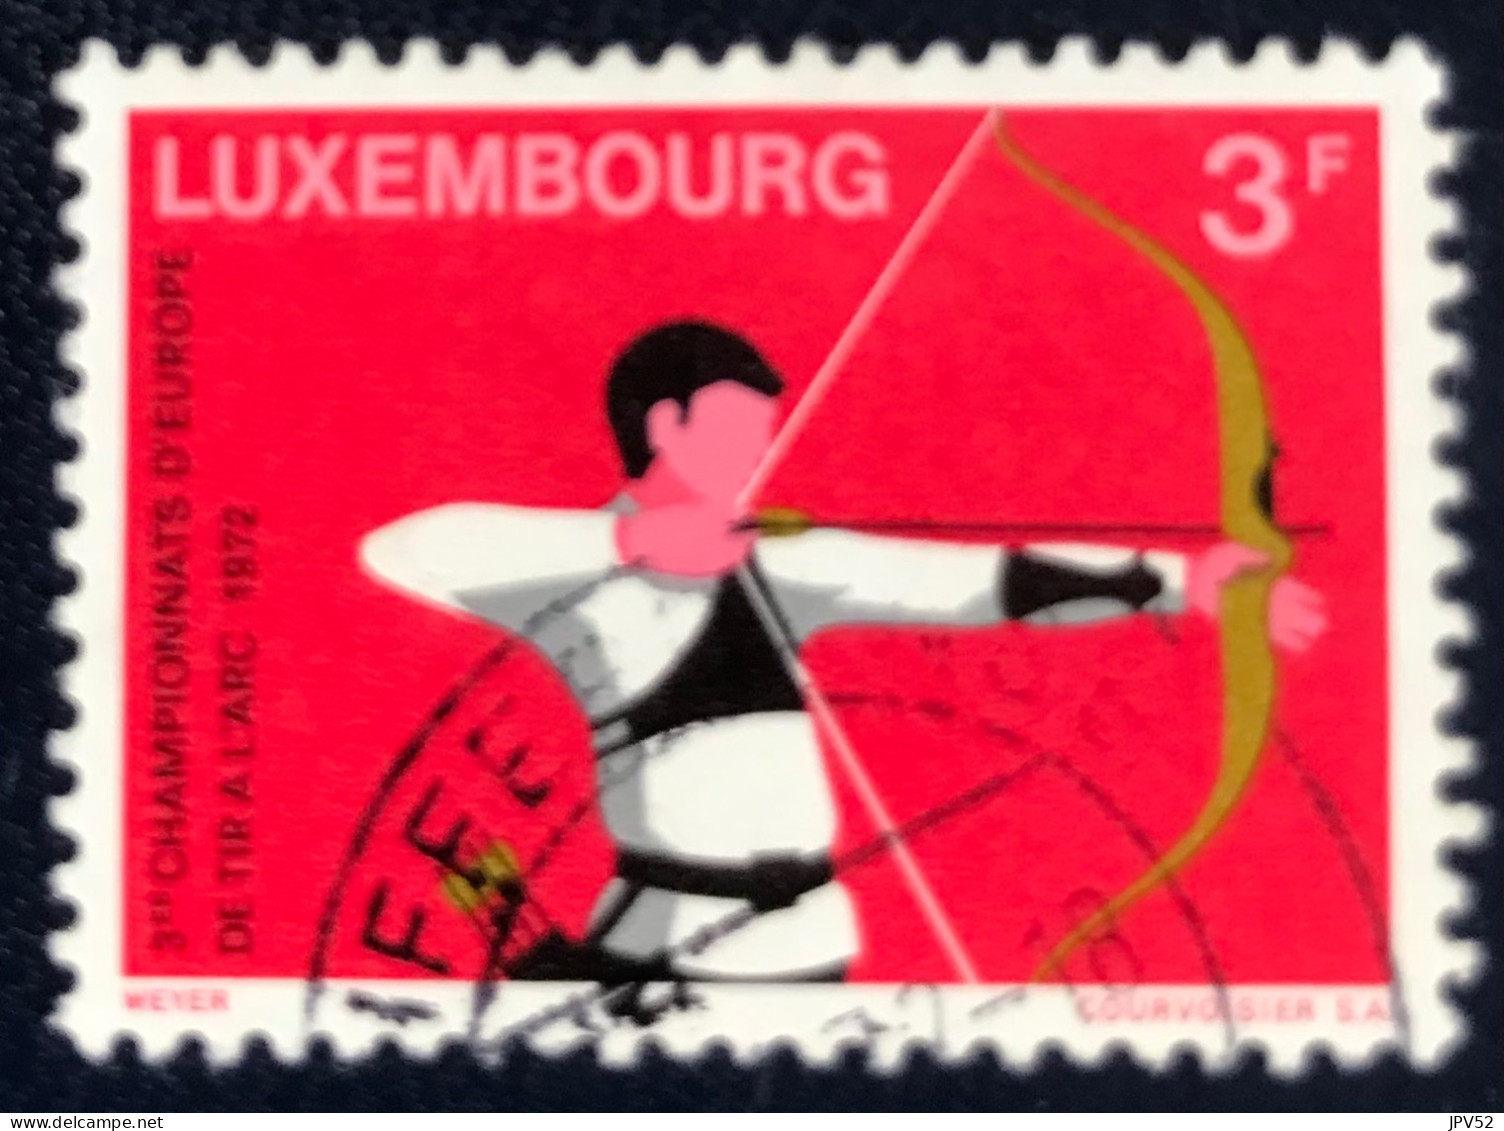 Luxembourg - Luxemburg - C18/31 - 1972 - (°)used - Michel 848 - Boogschutter - Usados